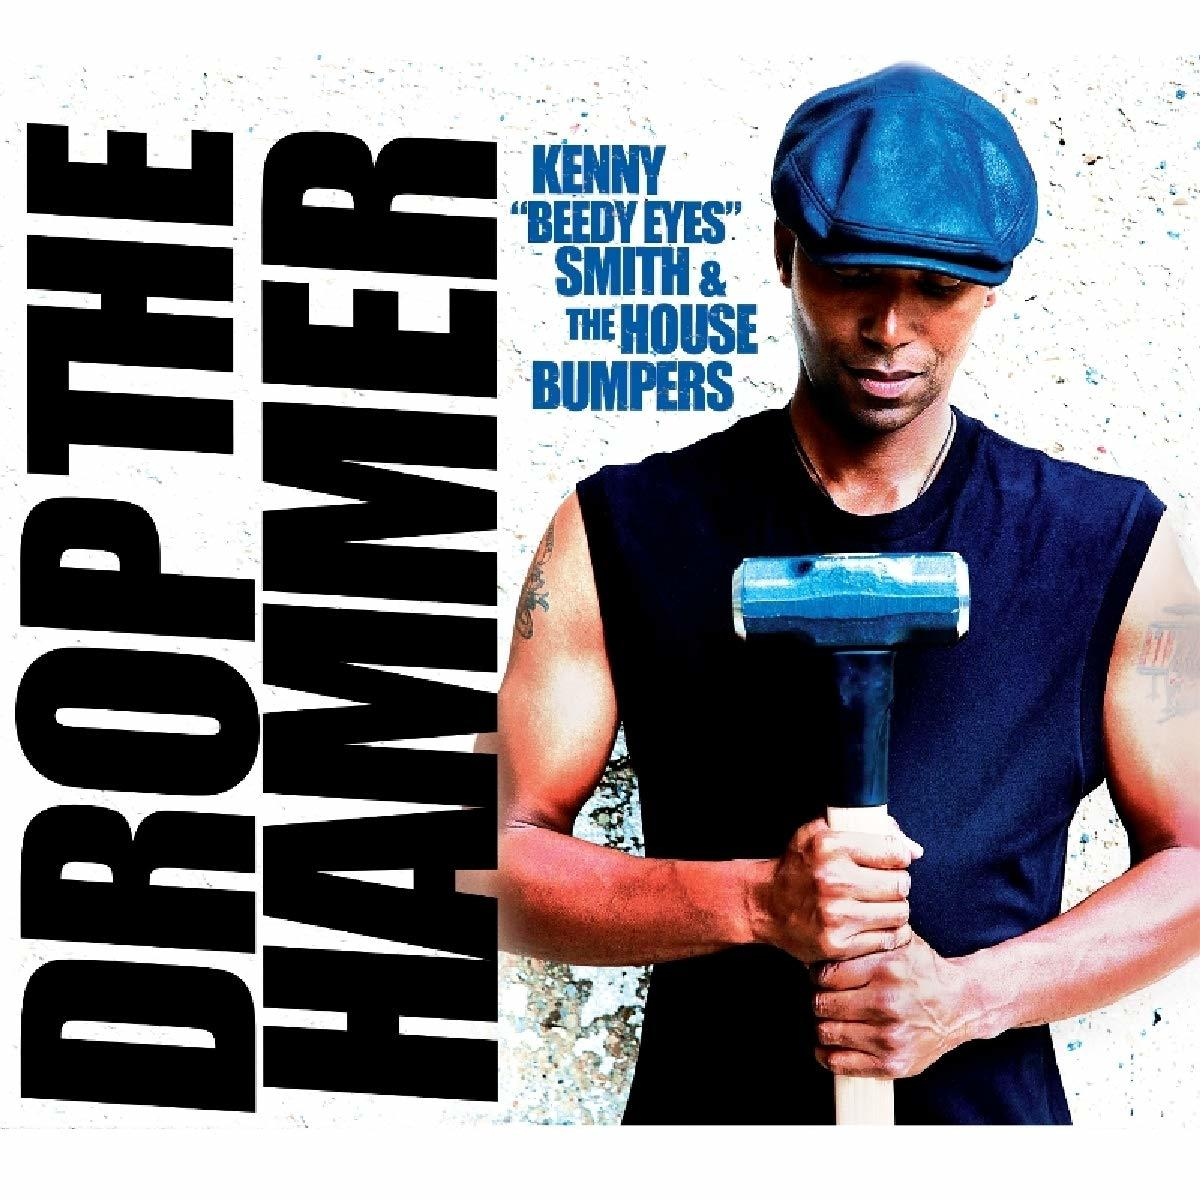 The House Bumpers, Kenny -beedy (CD) Drop - - Eyes- The Smith Hammer